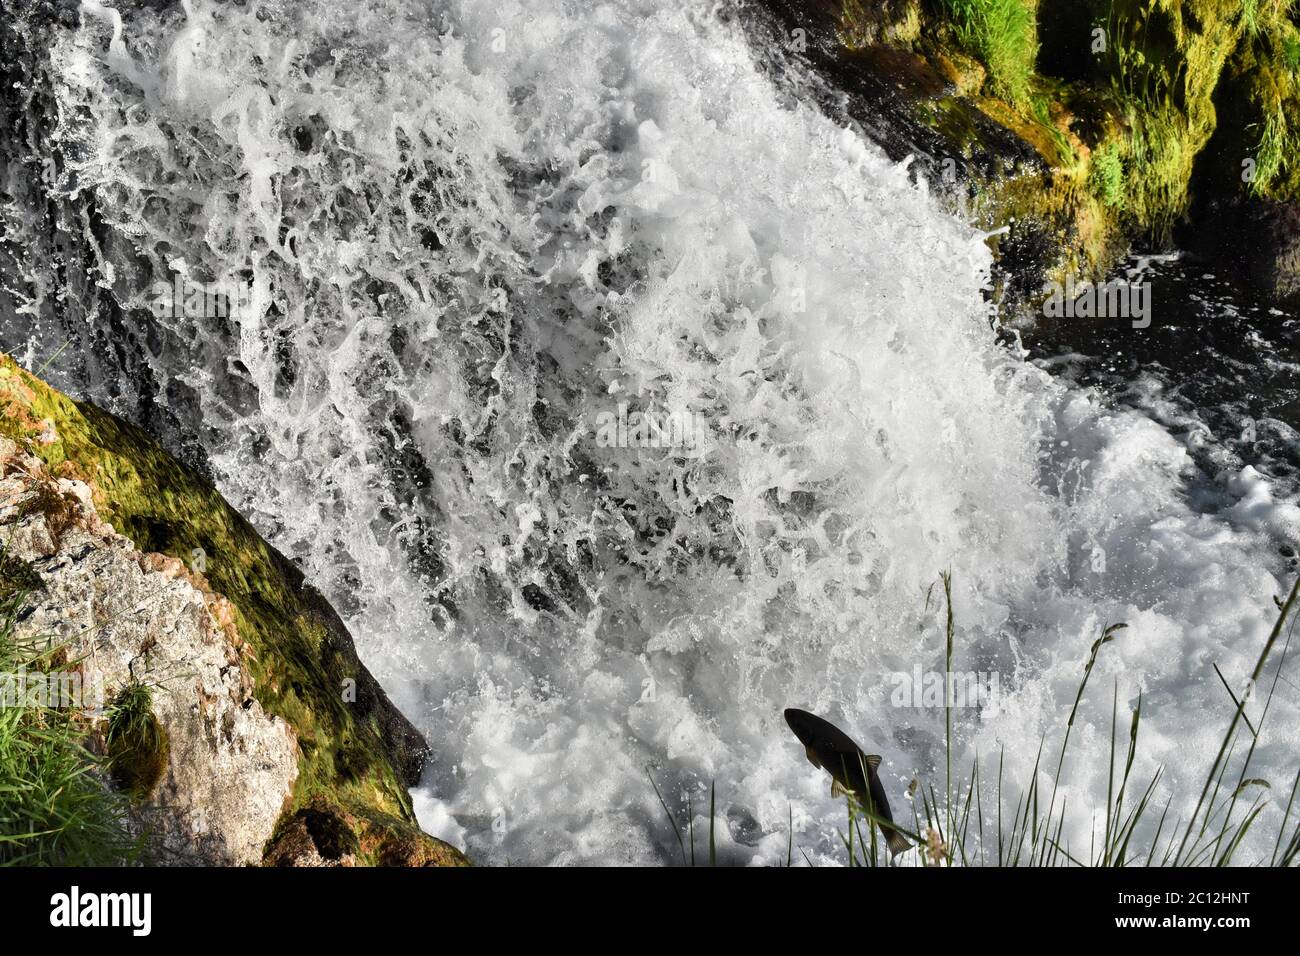 Fish is jumping against the waterfall at the rhine falls in Schaffhausen Switzerland Stock Photo